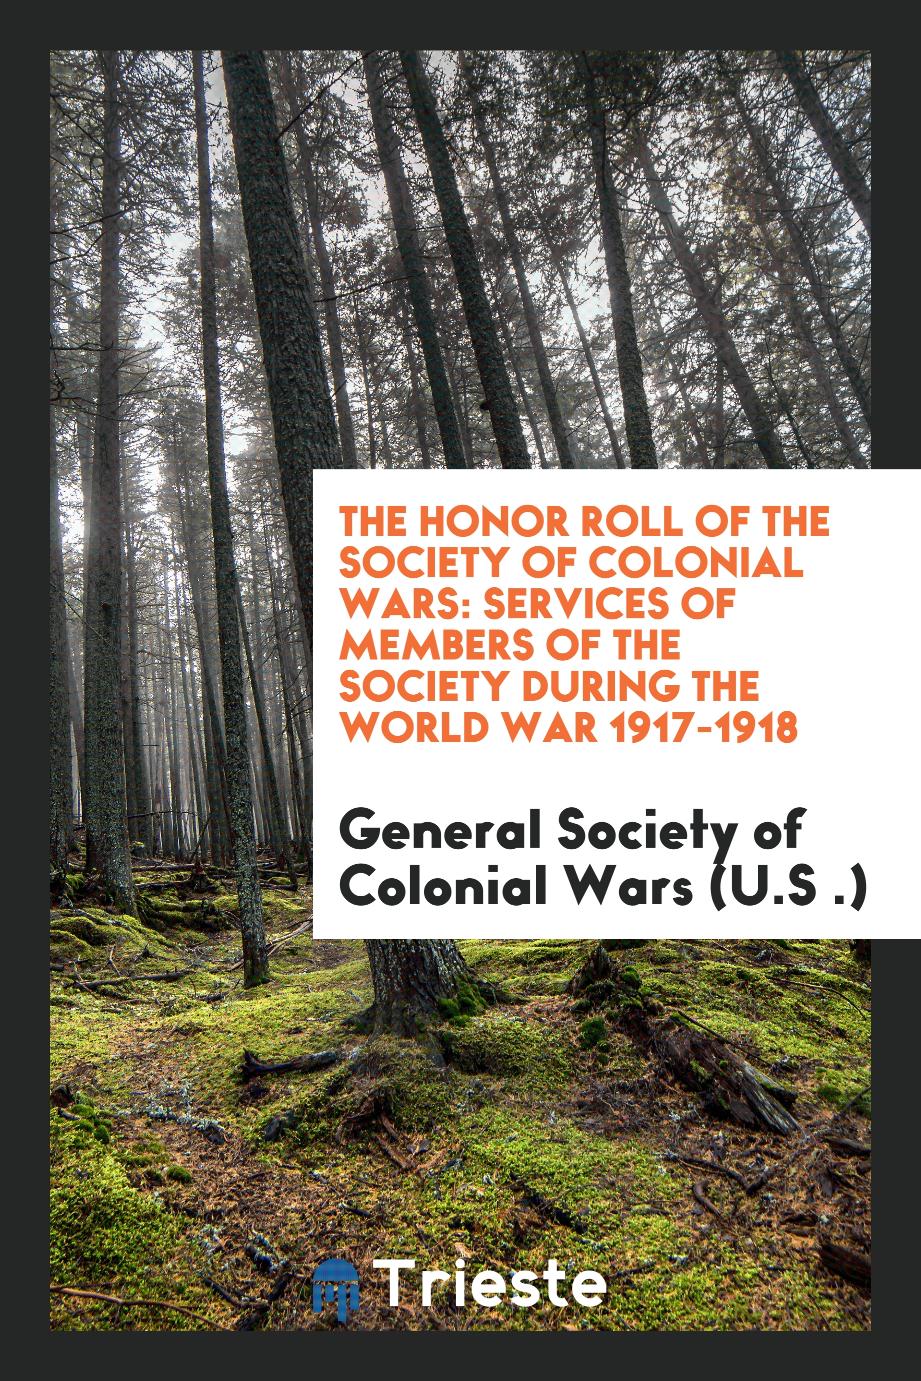 The Honor Roll of the Society of Colonial Wars: Services of Members of the Society During the World War 1917-1918